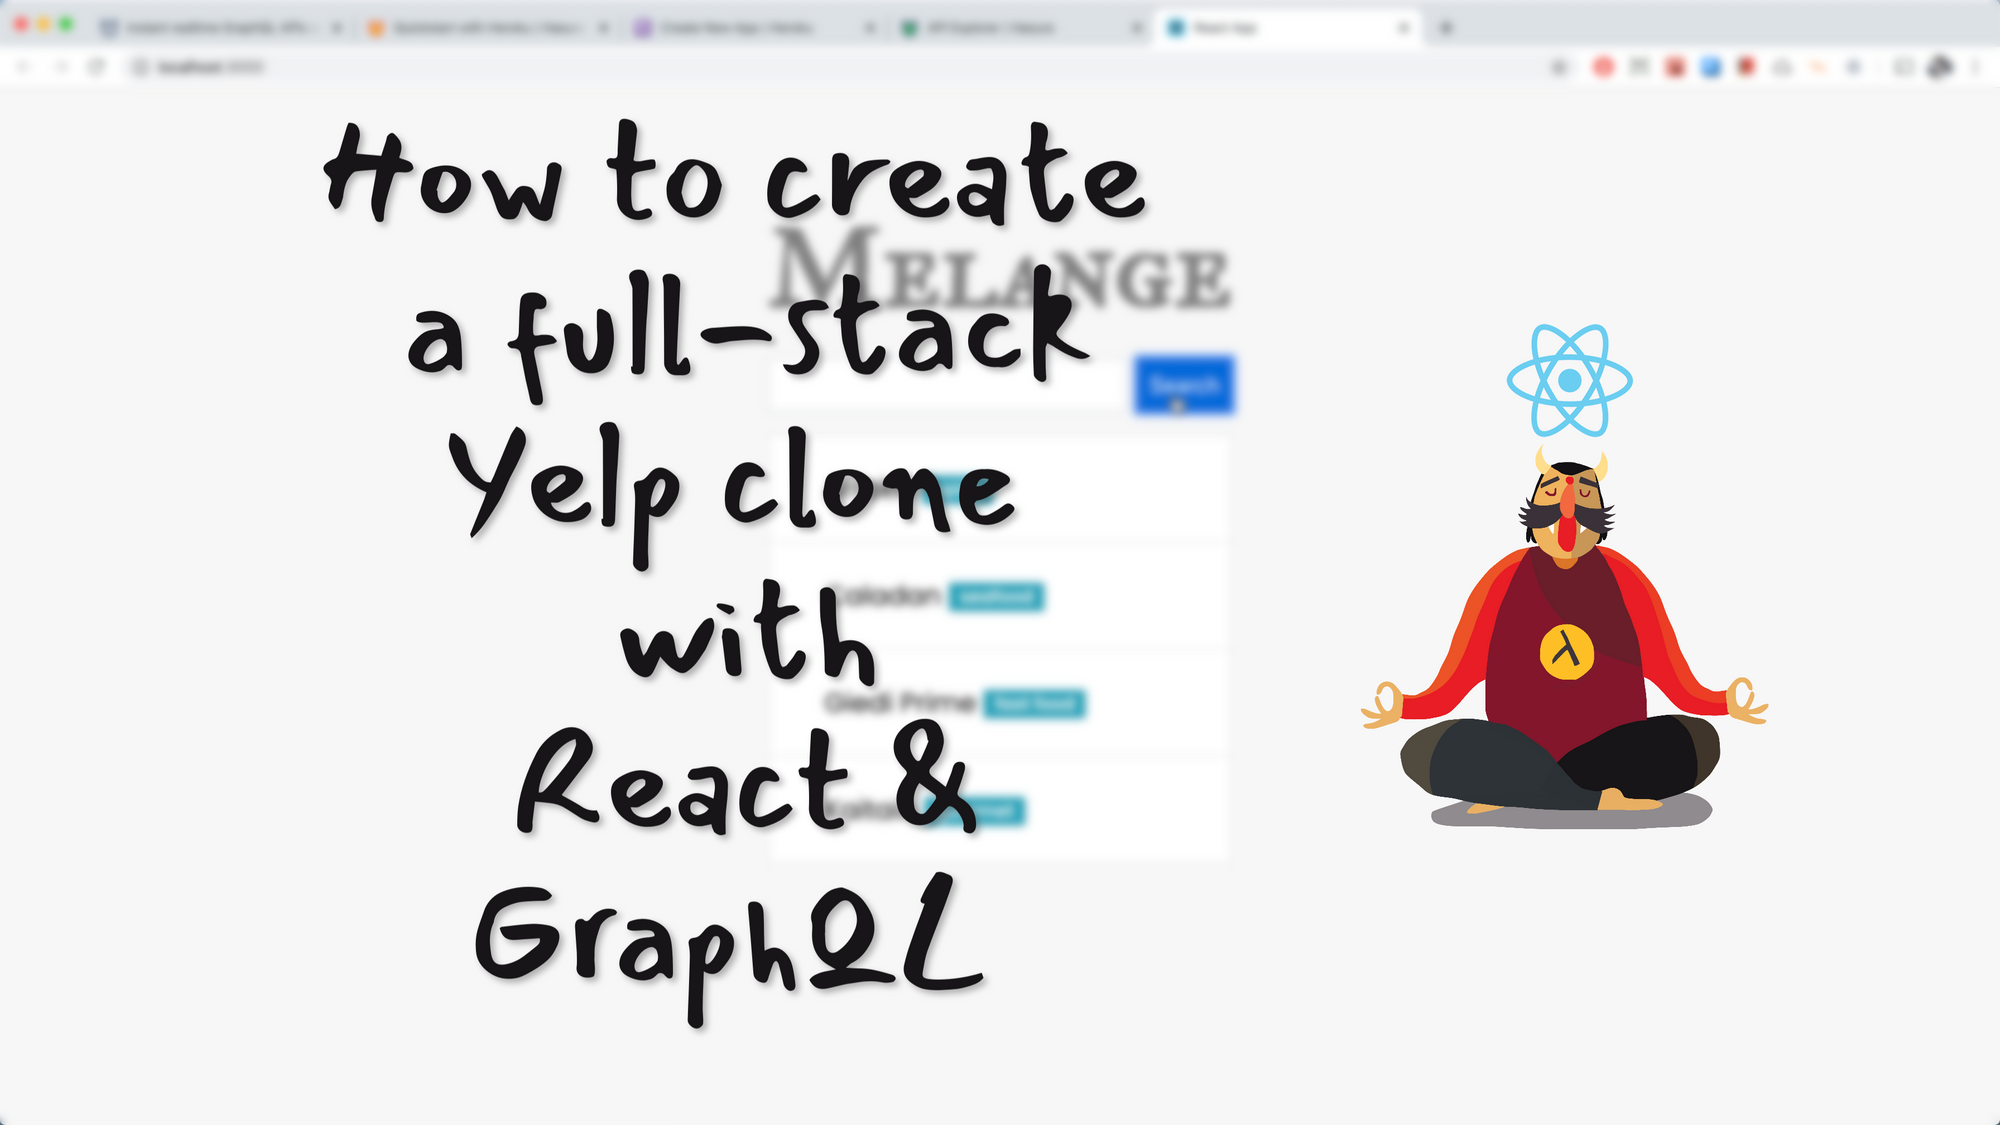 How to Create a Full-Stack Yelp Clone with React & GraphQL (Dune World Edition)